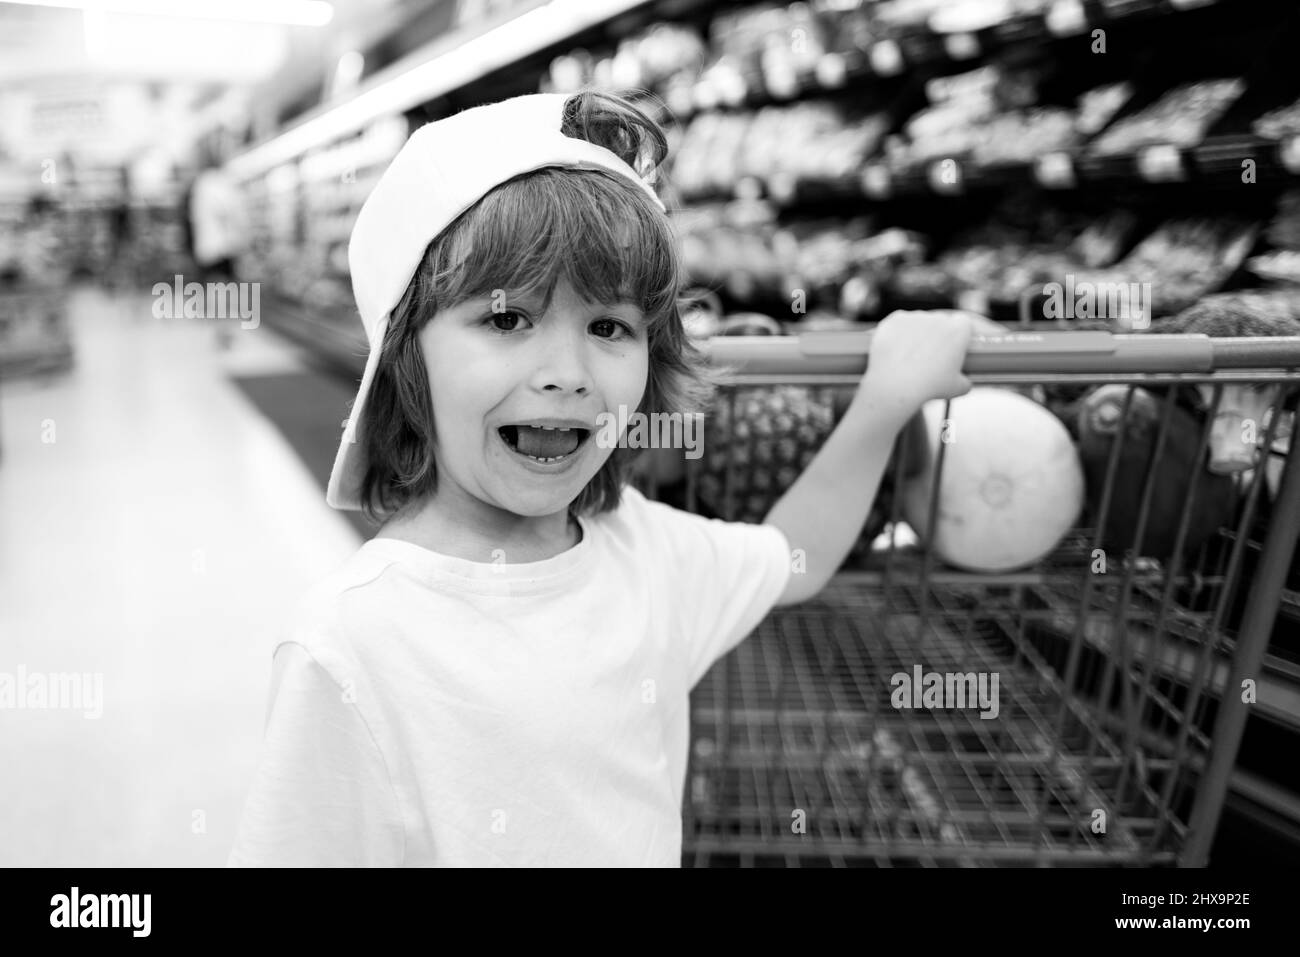 Customer child holdind trolley, shopping at supermarket, grocery store. Little boy in the supermarket. Cute boy child with shopping trolley with Stock Photo